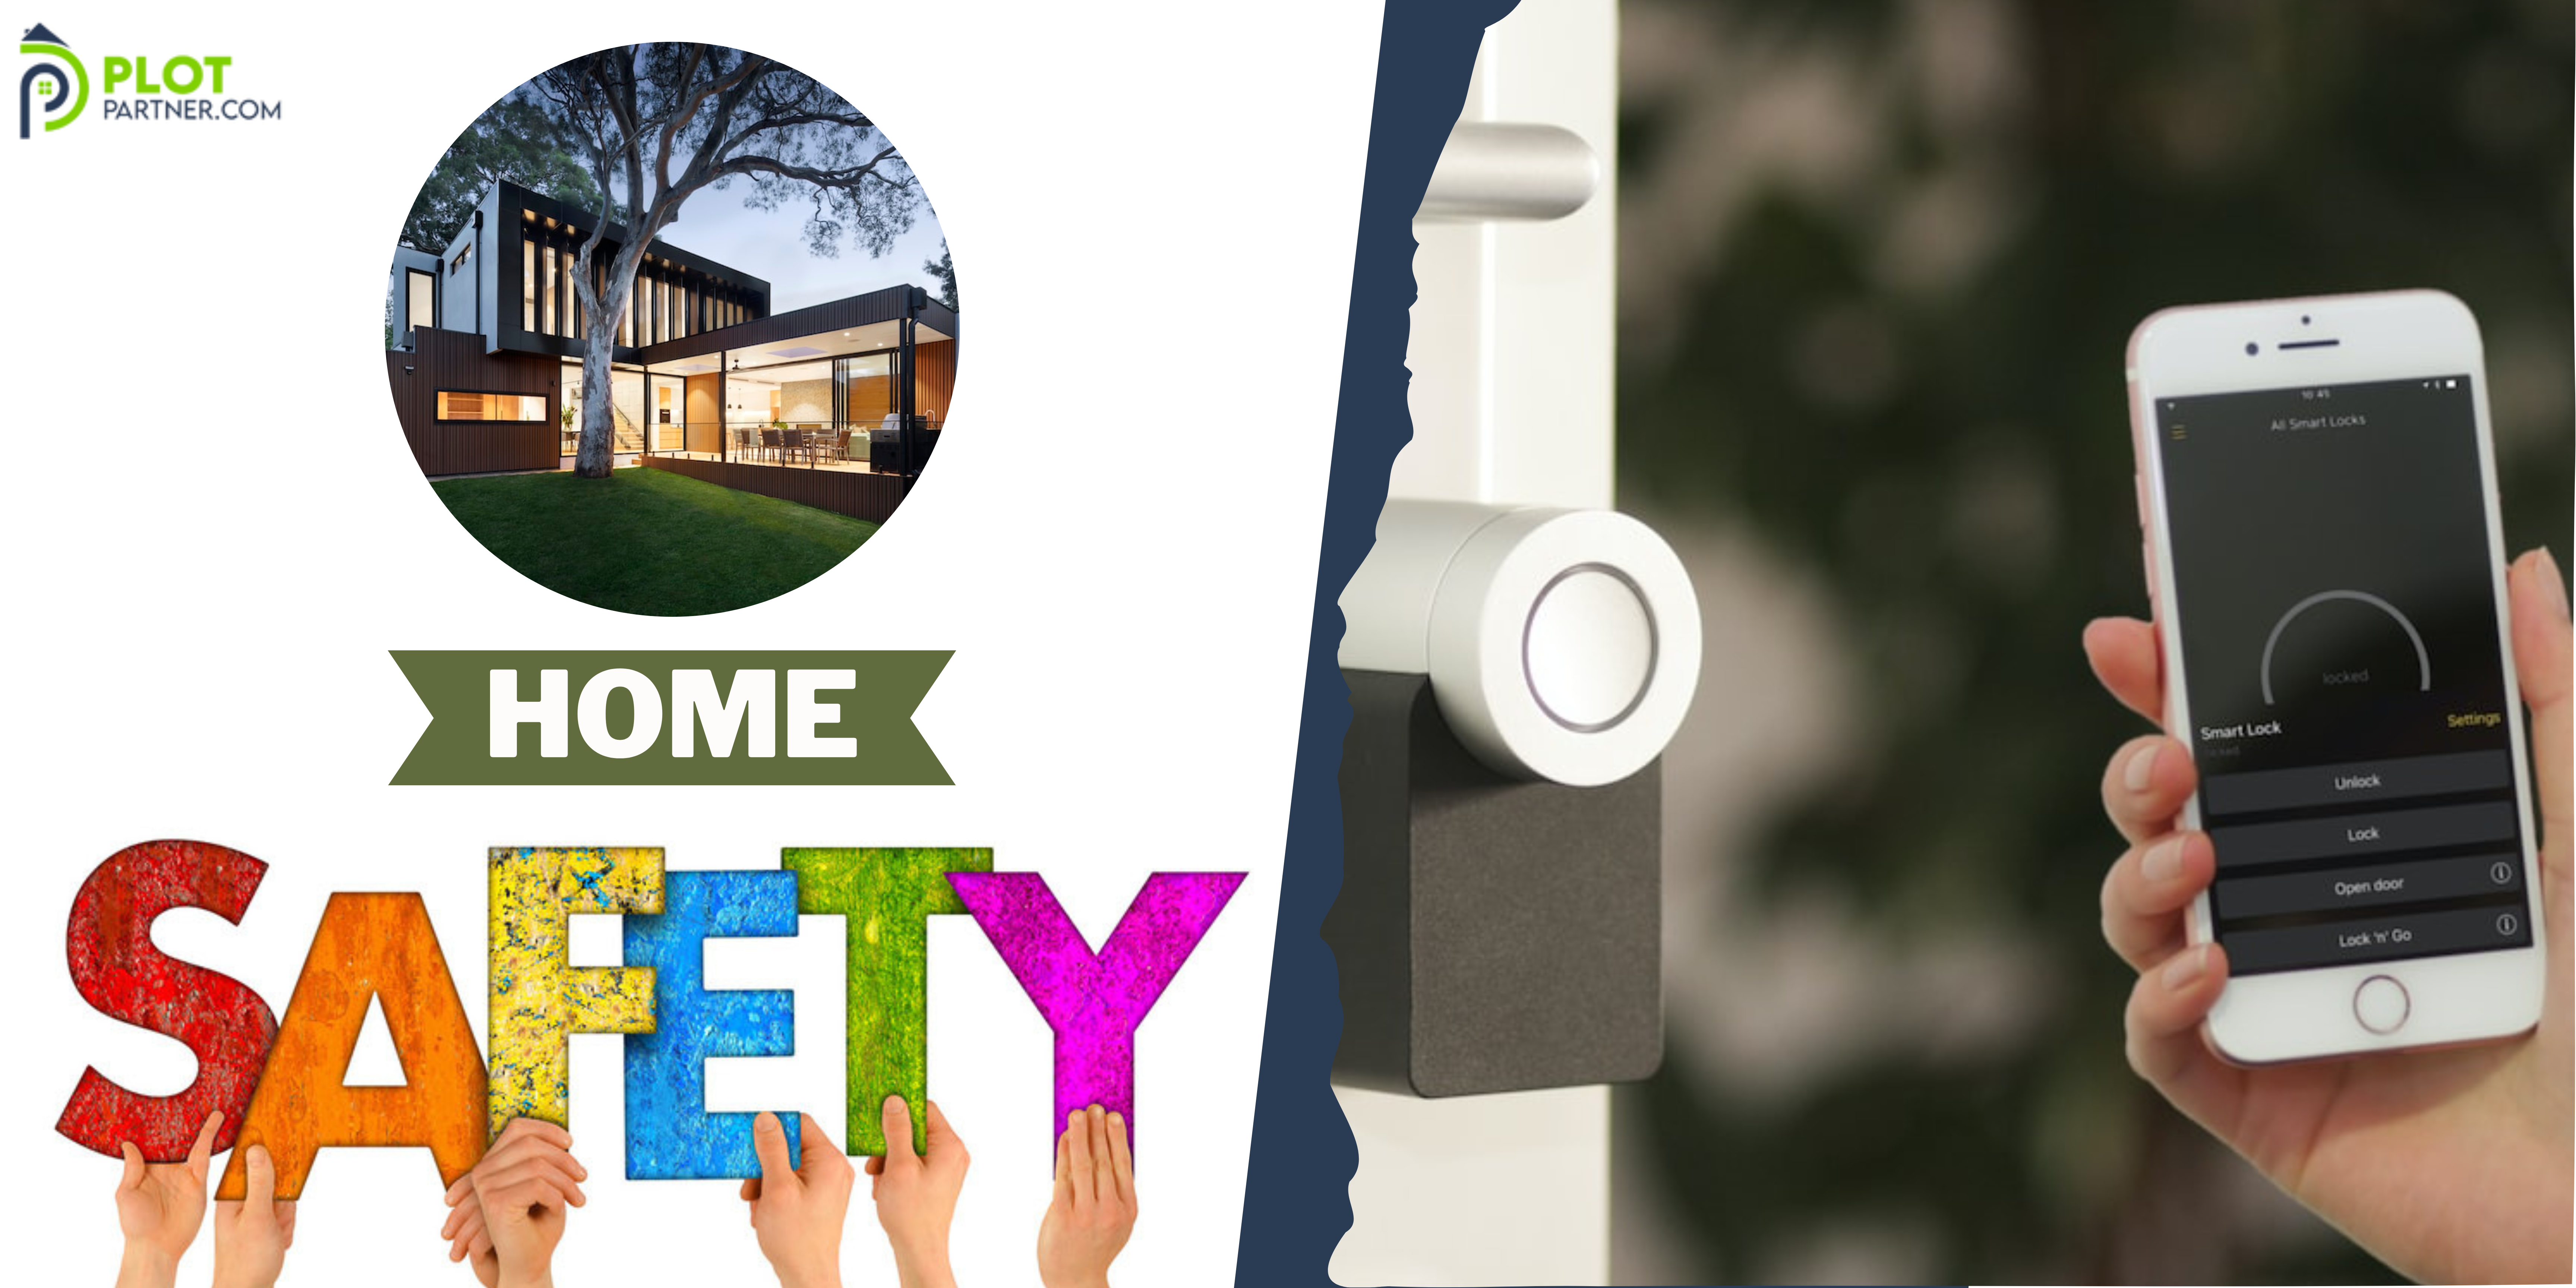 Top 10 Must-Haves for Your Safety at Home | Home Safety Tips | Plot-Partner